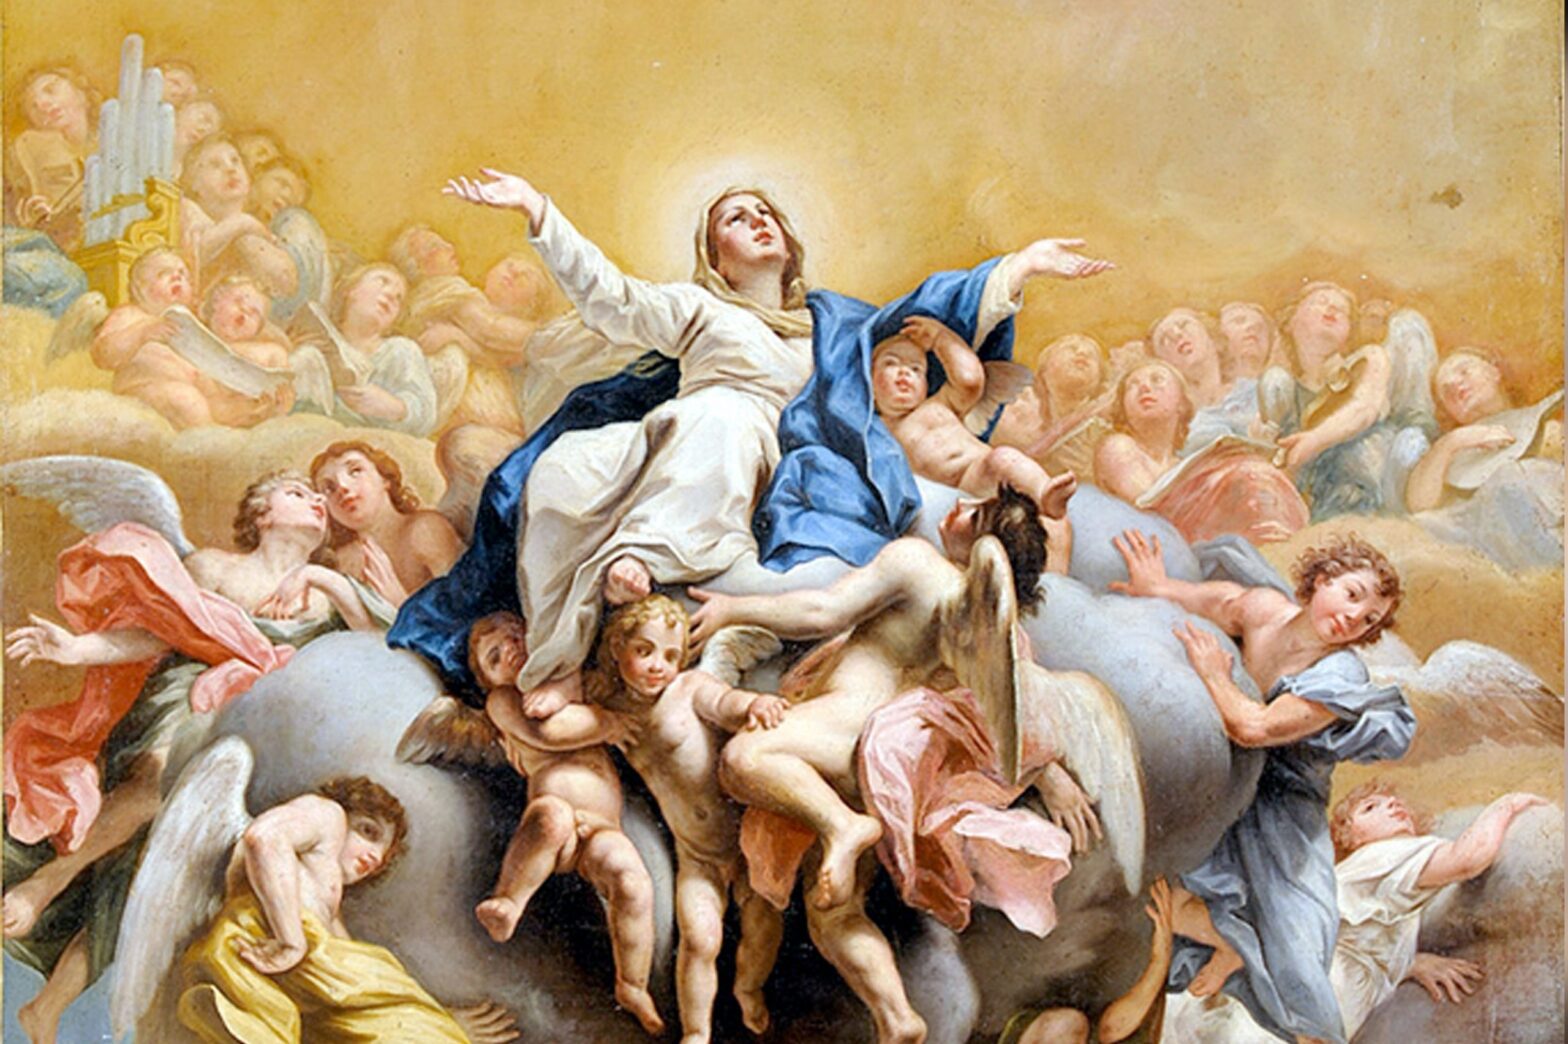 Solemnity of the Assumption of the Blessed Virgin Mary Church of the